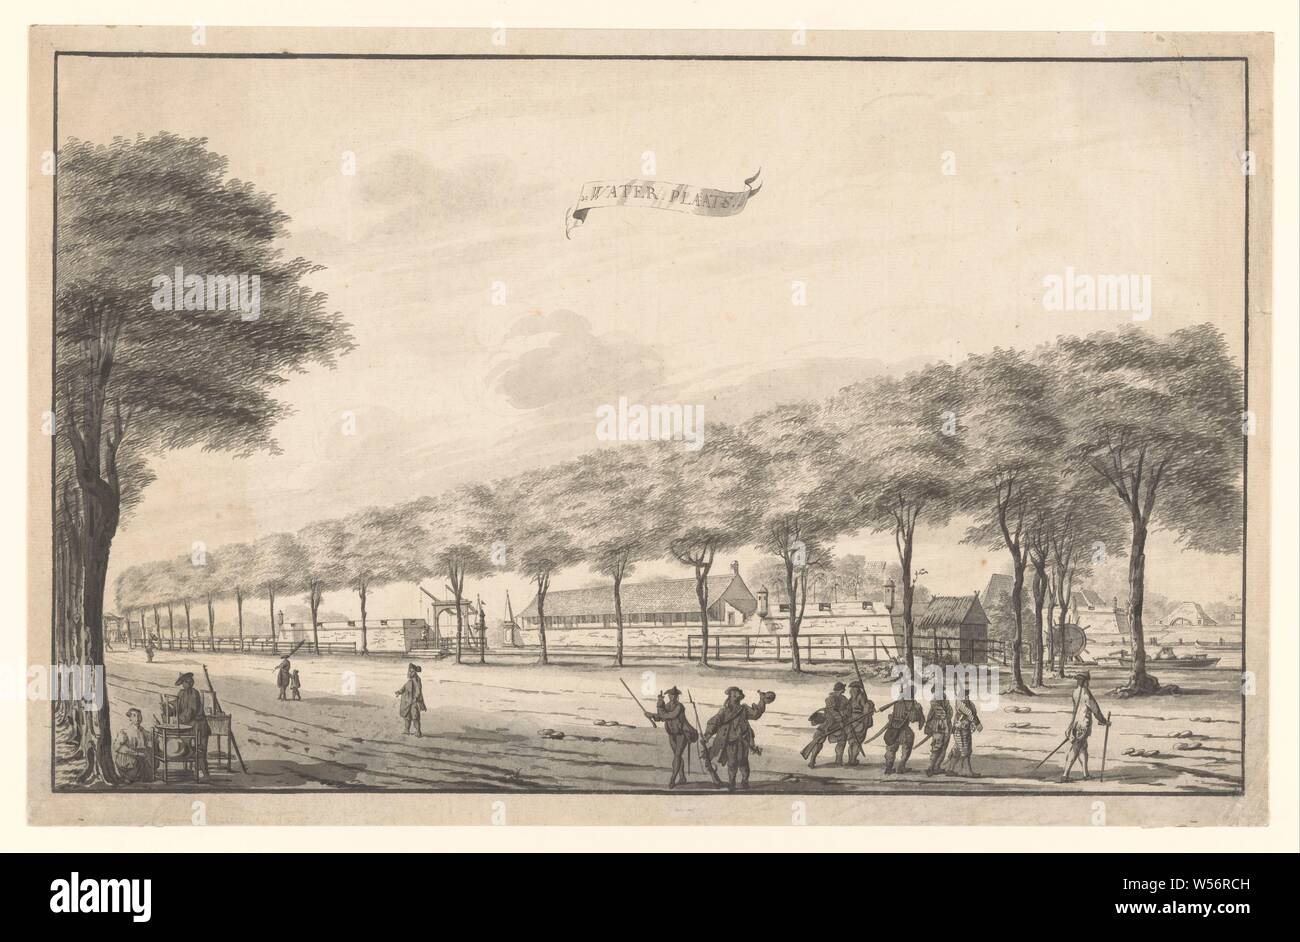 View of Fort de Waterplaats on Molenvliet te Batavia, Waterplaats (title on  object), View of Fort de Waterplaats on the Molenvliet in Batavia. View of  an avenue with the fortress behind a